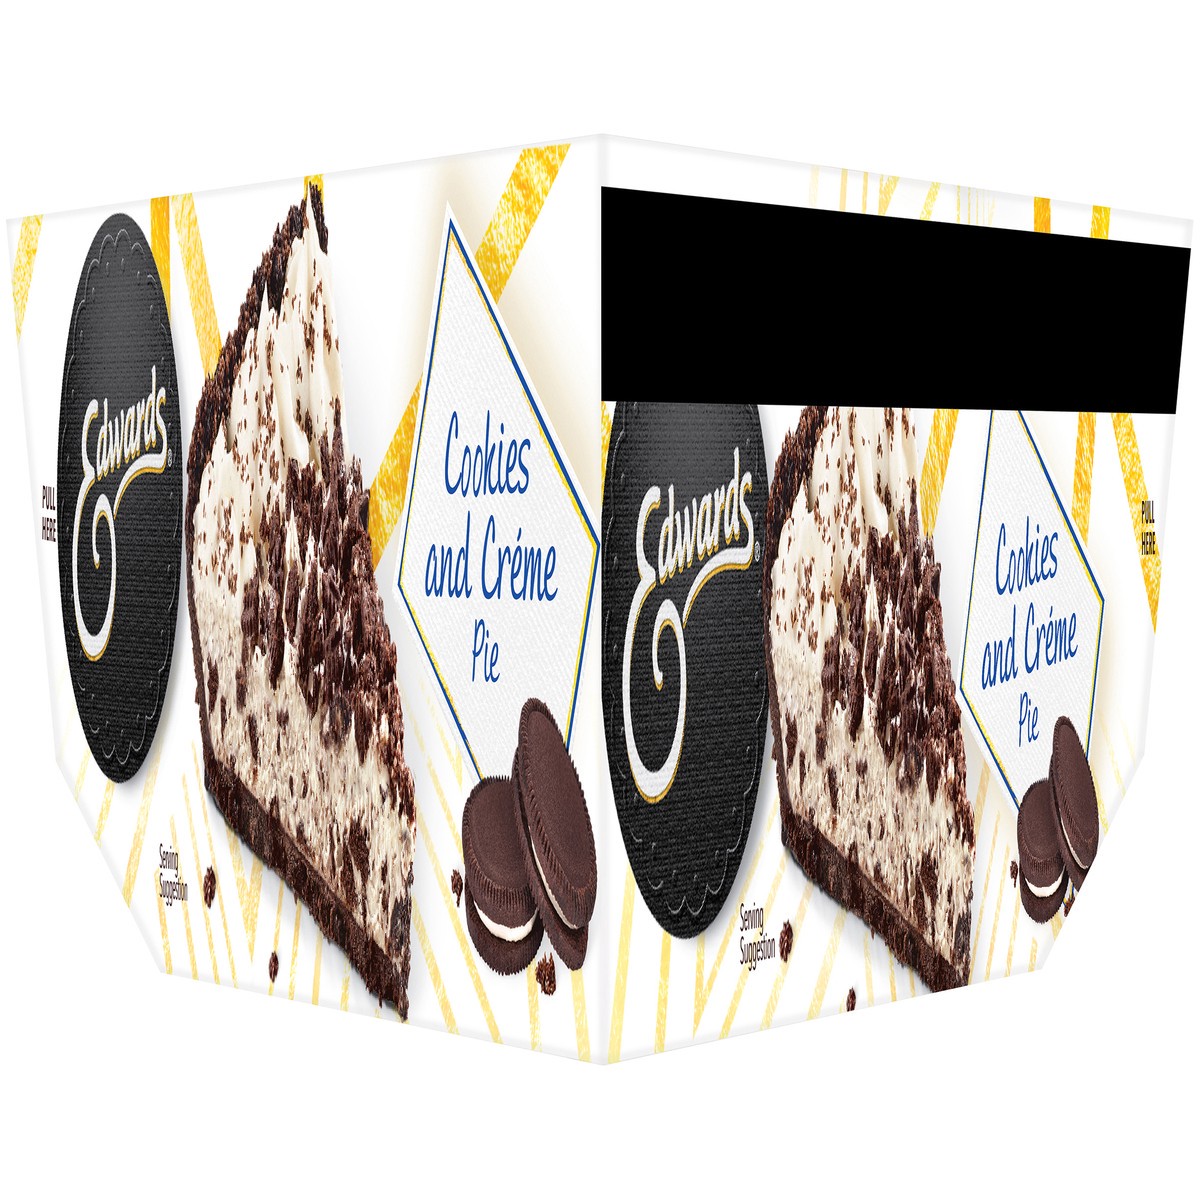 slide 9 of 14, Edwards Cookies and Creme Pie 2.6 oz. Box, 2.6 oz